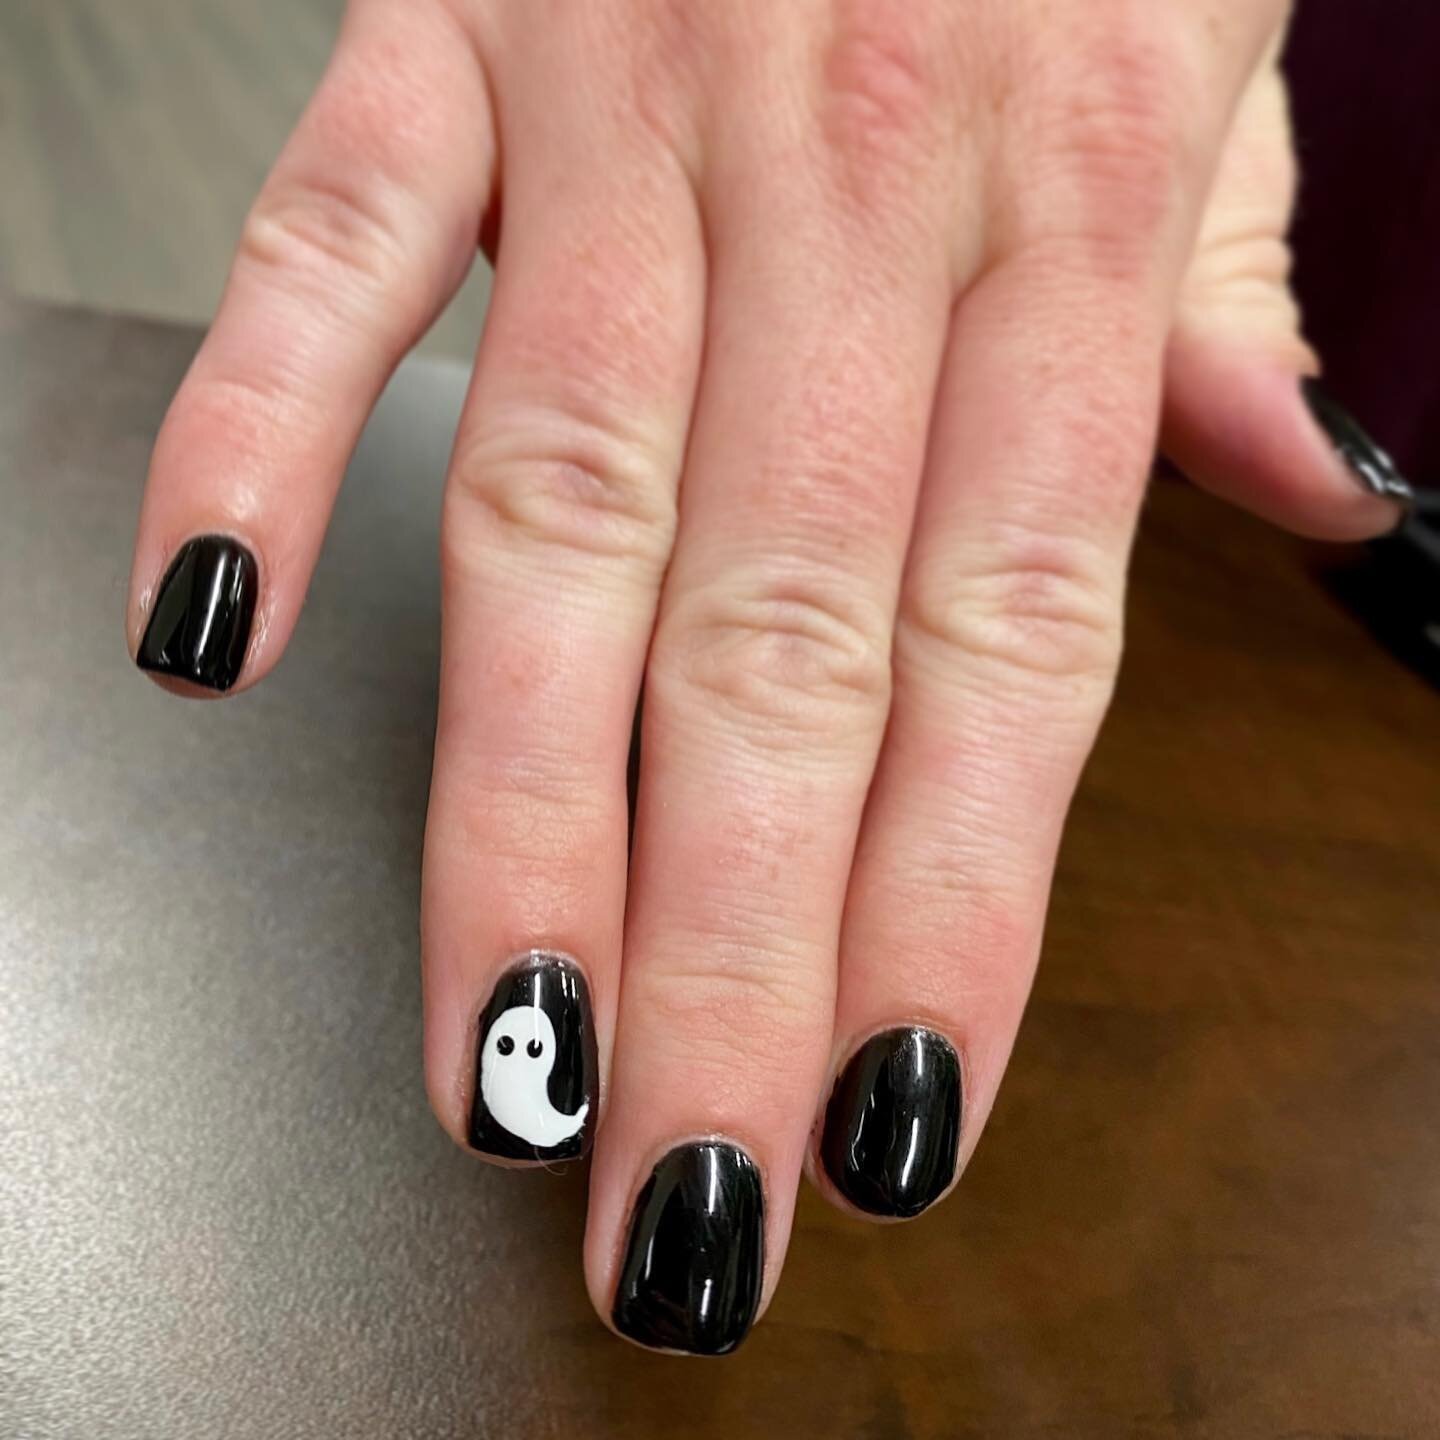 spOoOoOoOoky lil manicure by @styled_by_kristenmarie 👻
&bull;
It&rsquo;s not too late to book your some Halloween nails🖤
&bull;
Kristen is in today Wednesday 10-8 
&amp; tomorrow
Thursday 12-8!
&bull;
&bull;
&bull;
#hudsonvalley #hudsonvalleyny #na